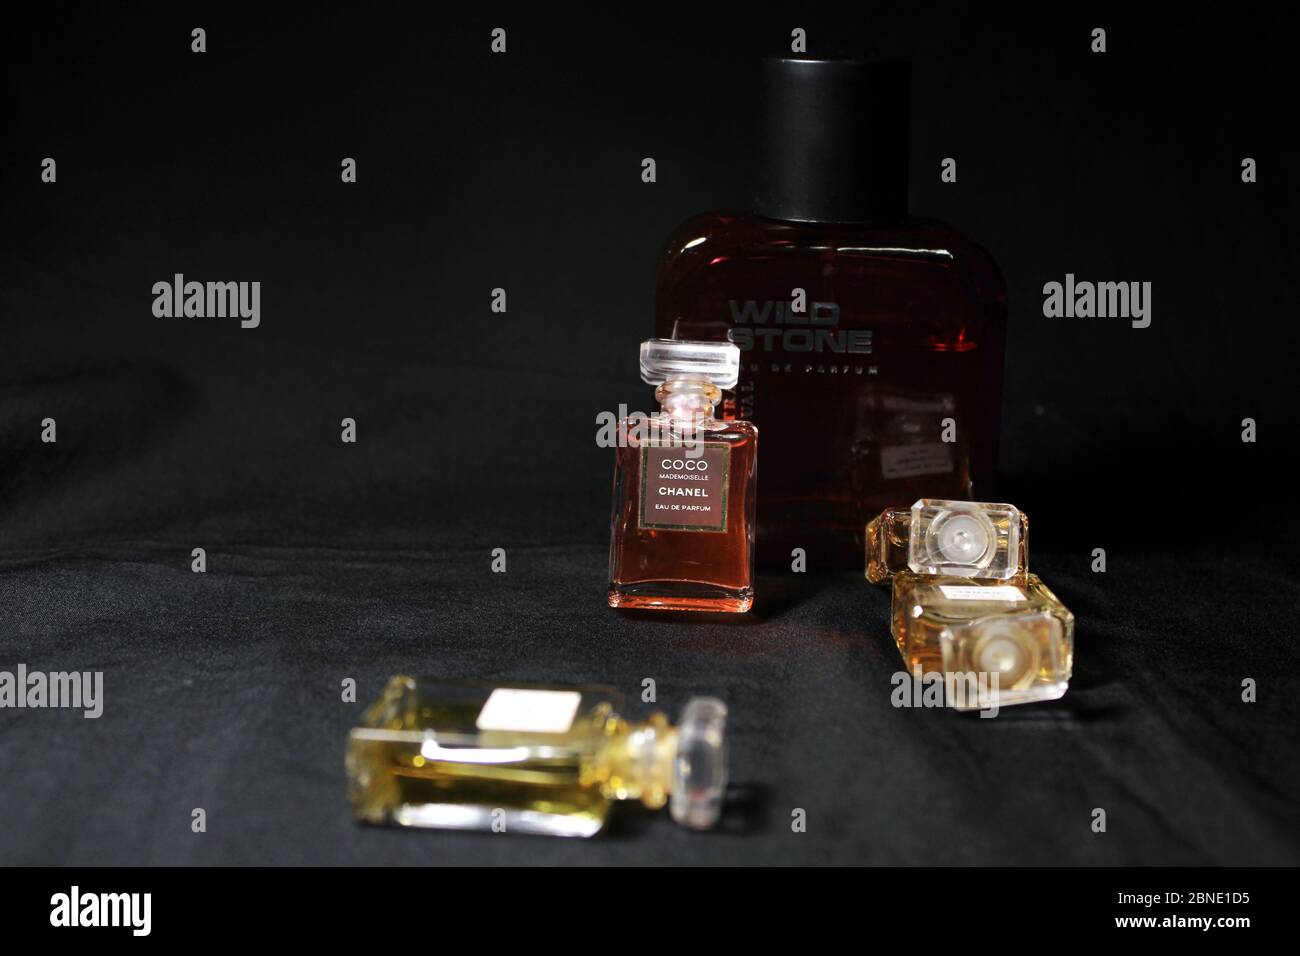 Wild stone perfume for men hi-res stock photography and images - Alamy